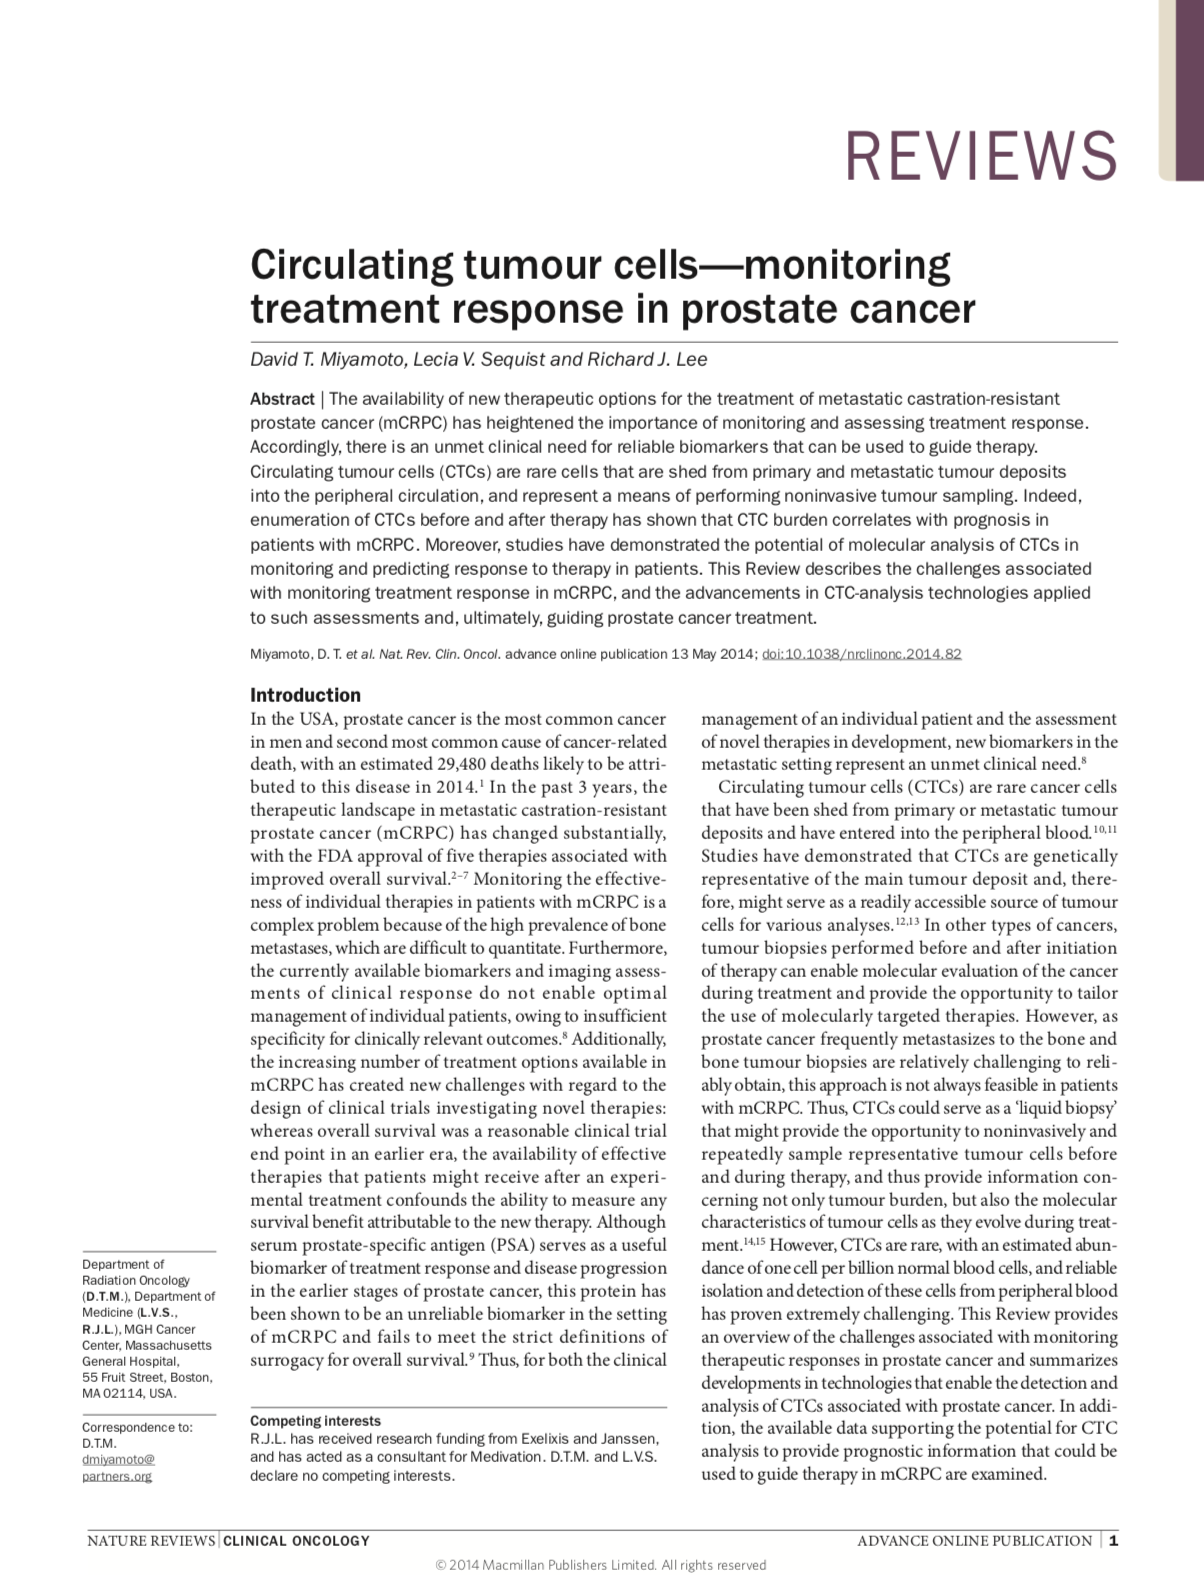 Nature Reviews Clinical Oncology 2014